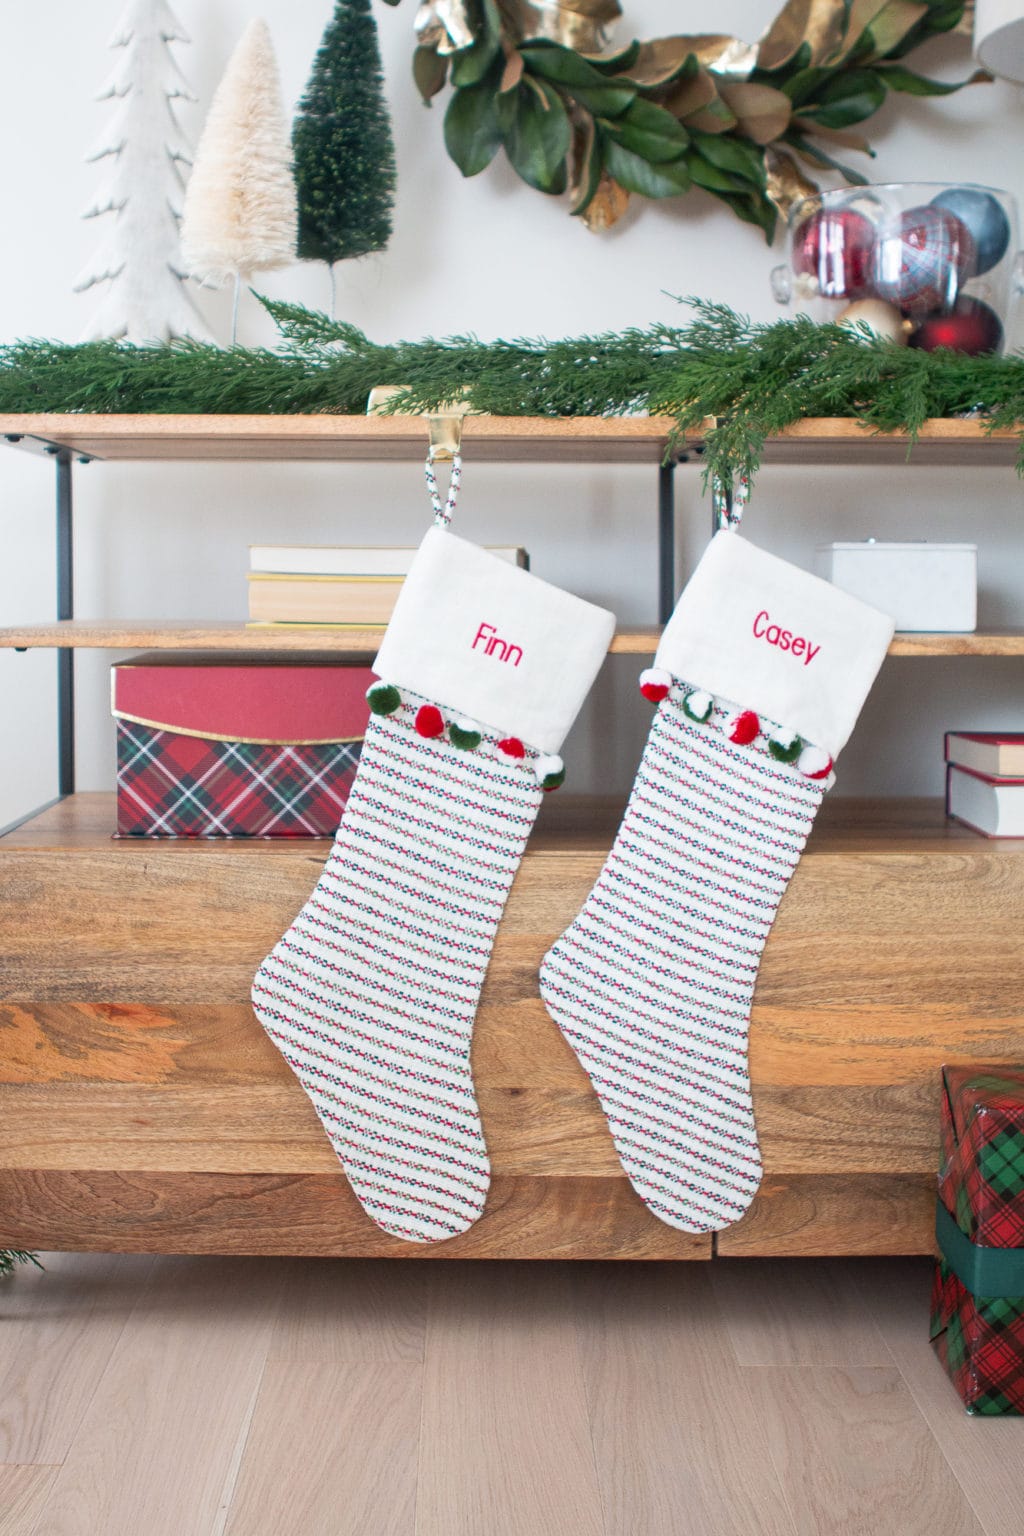 7 Simple Tips to Style a Holiday Entry | The DIY Playbook